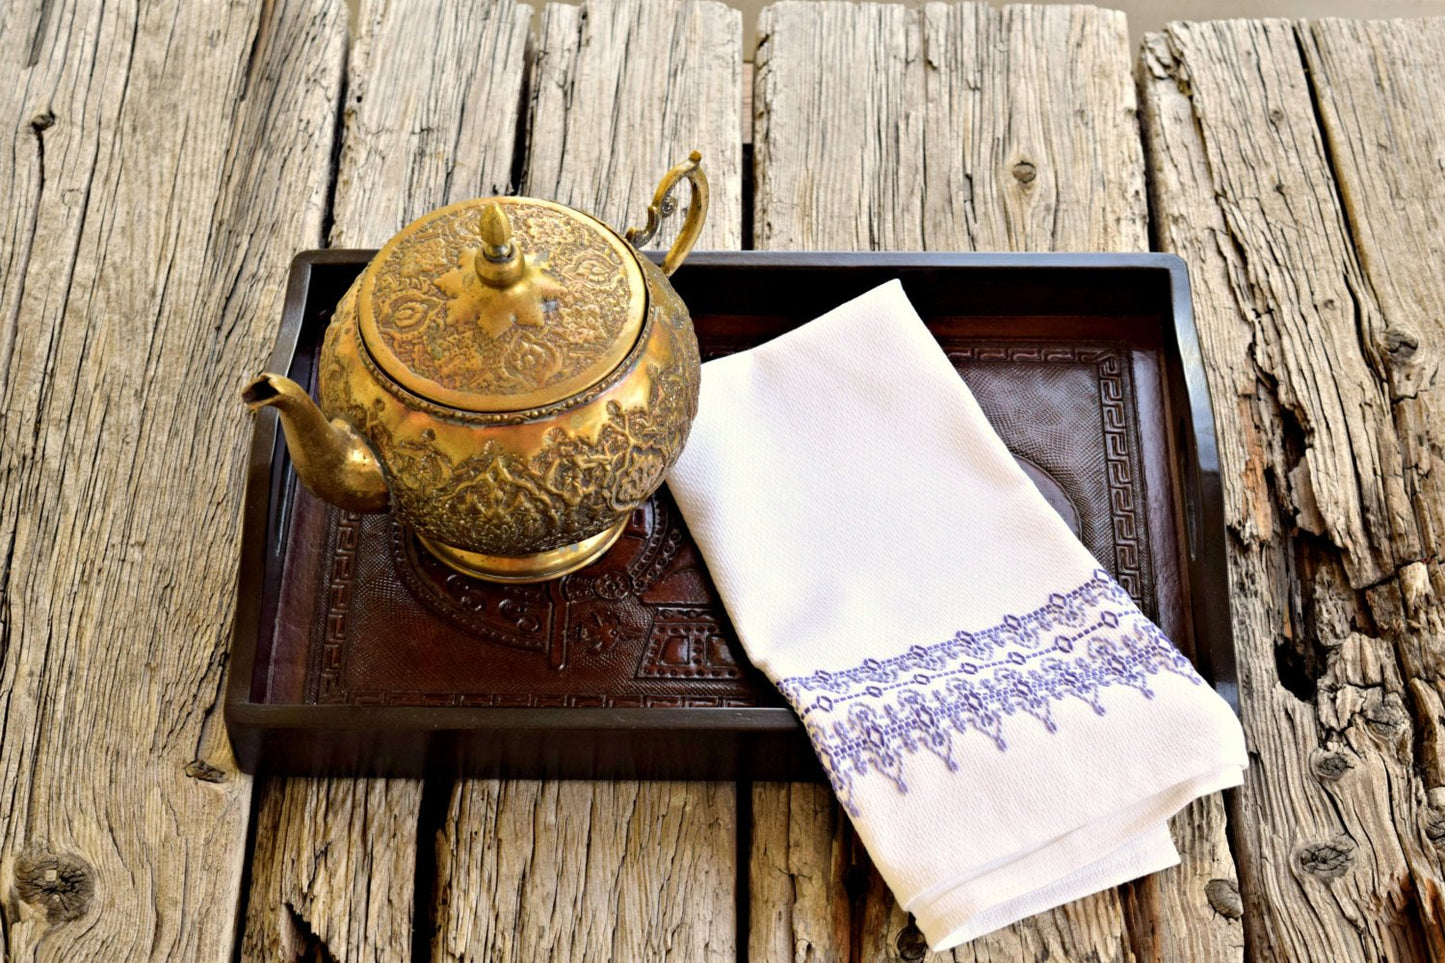 White huck kitchen towel embroidered with filigree design in shades of lavender on tray with Moroccan teapot